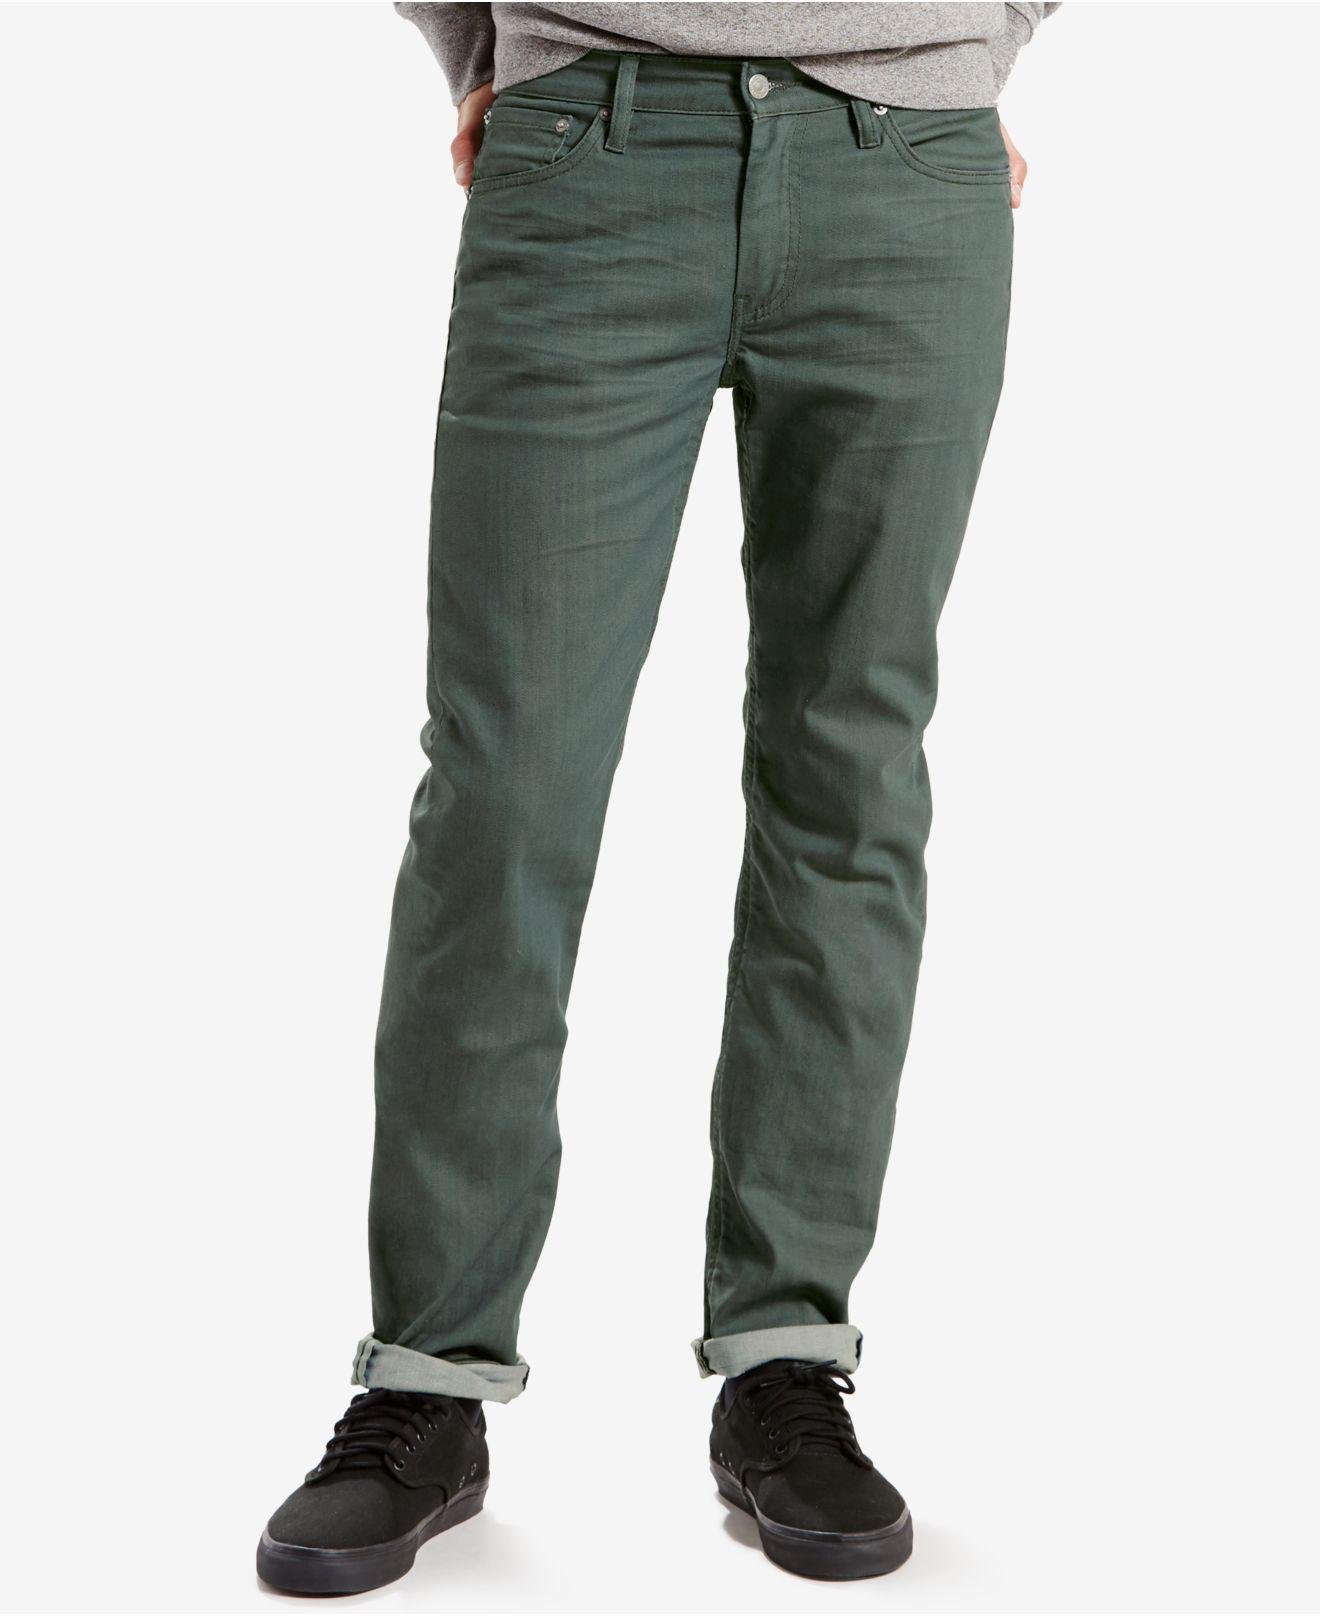 Lyst - Levi's 511 Slim-fit Commuter Jeans in Natural for Men